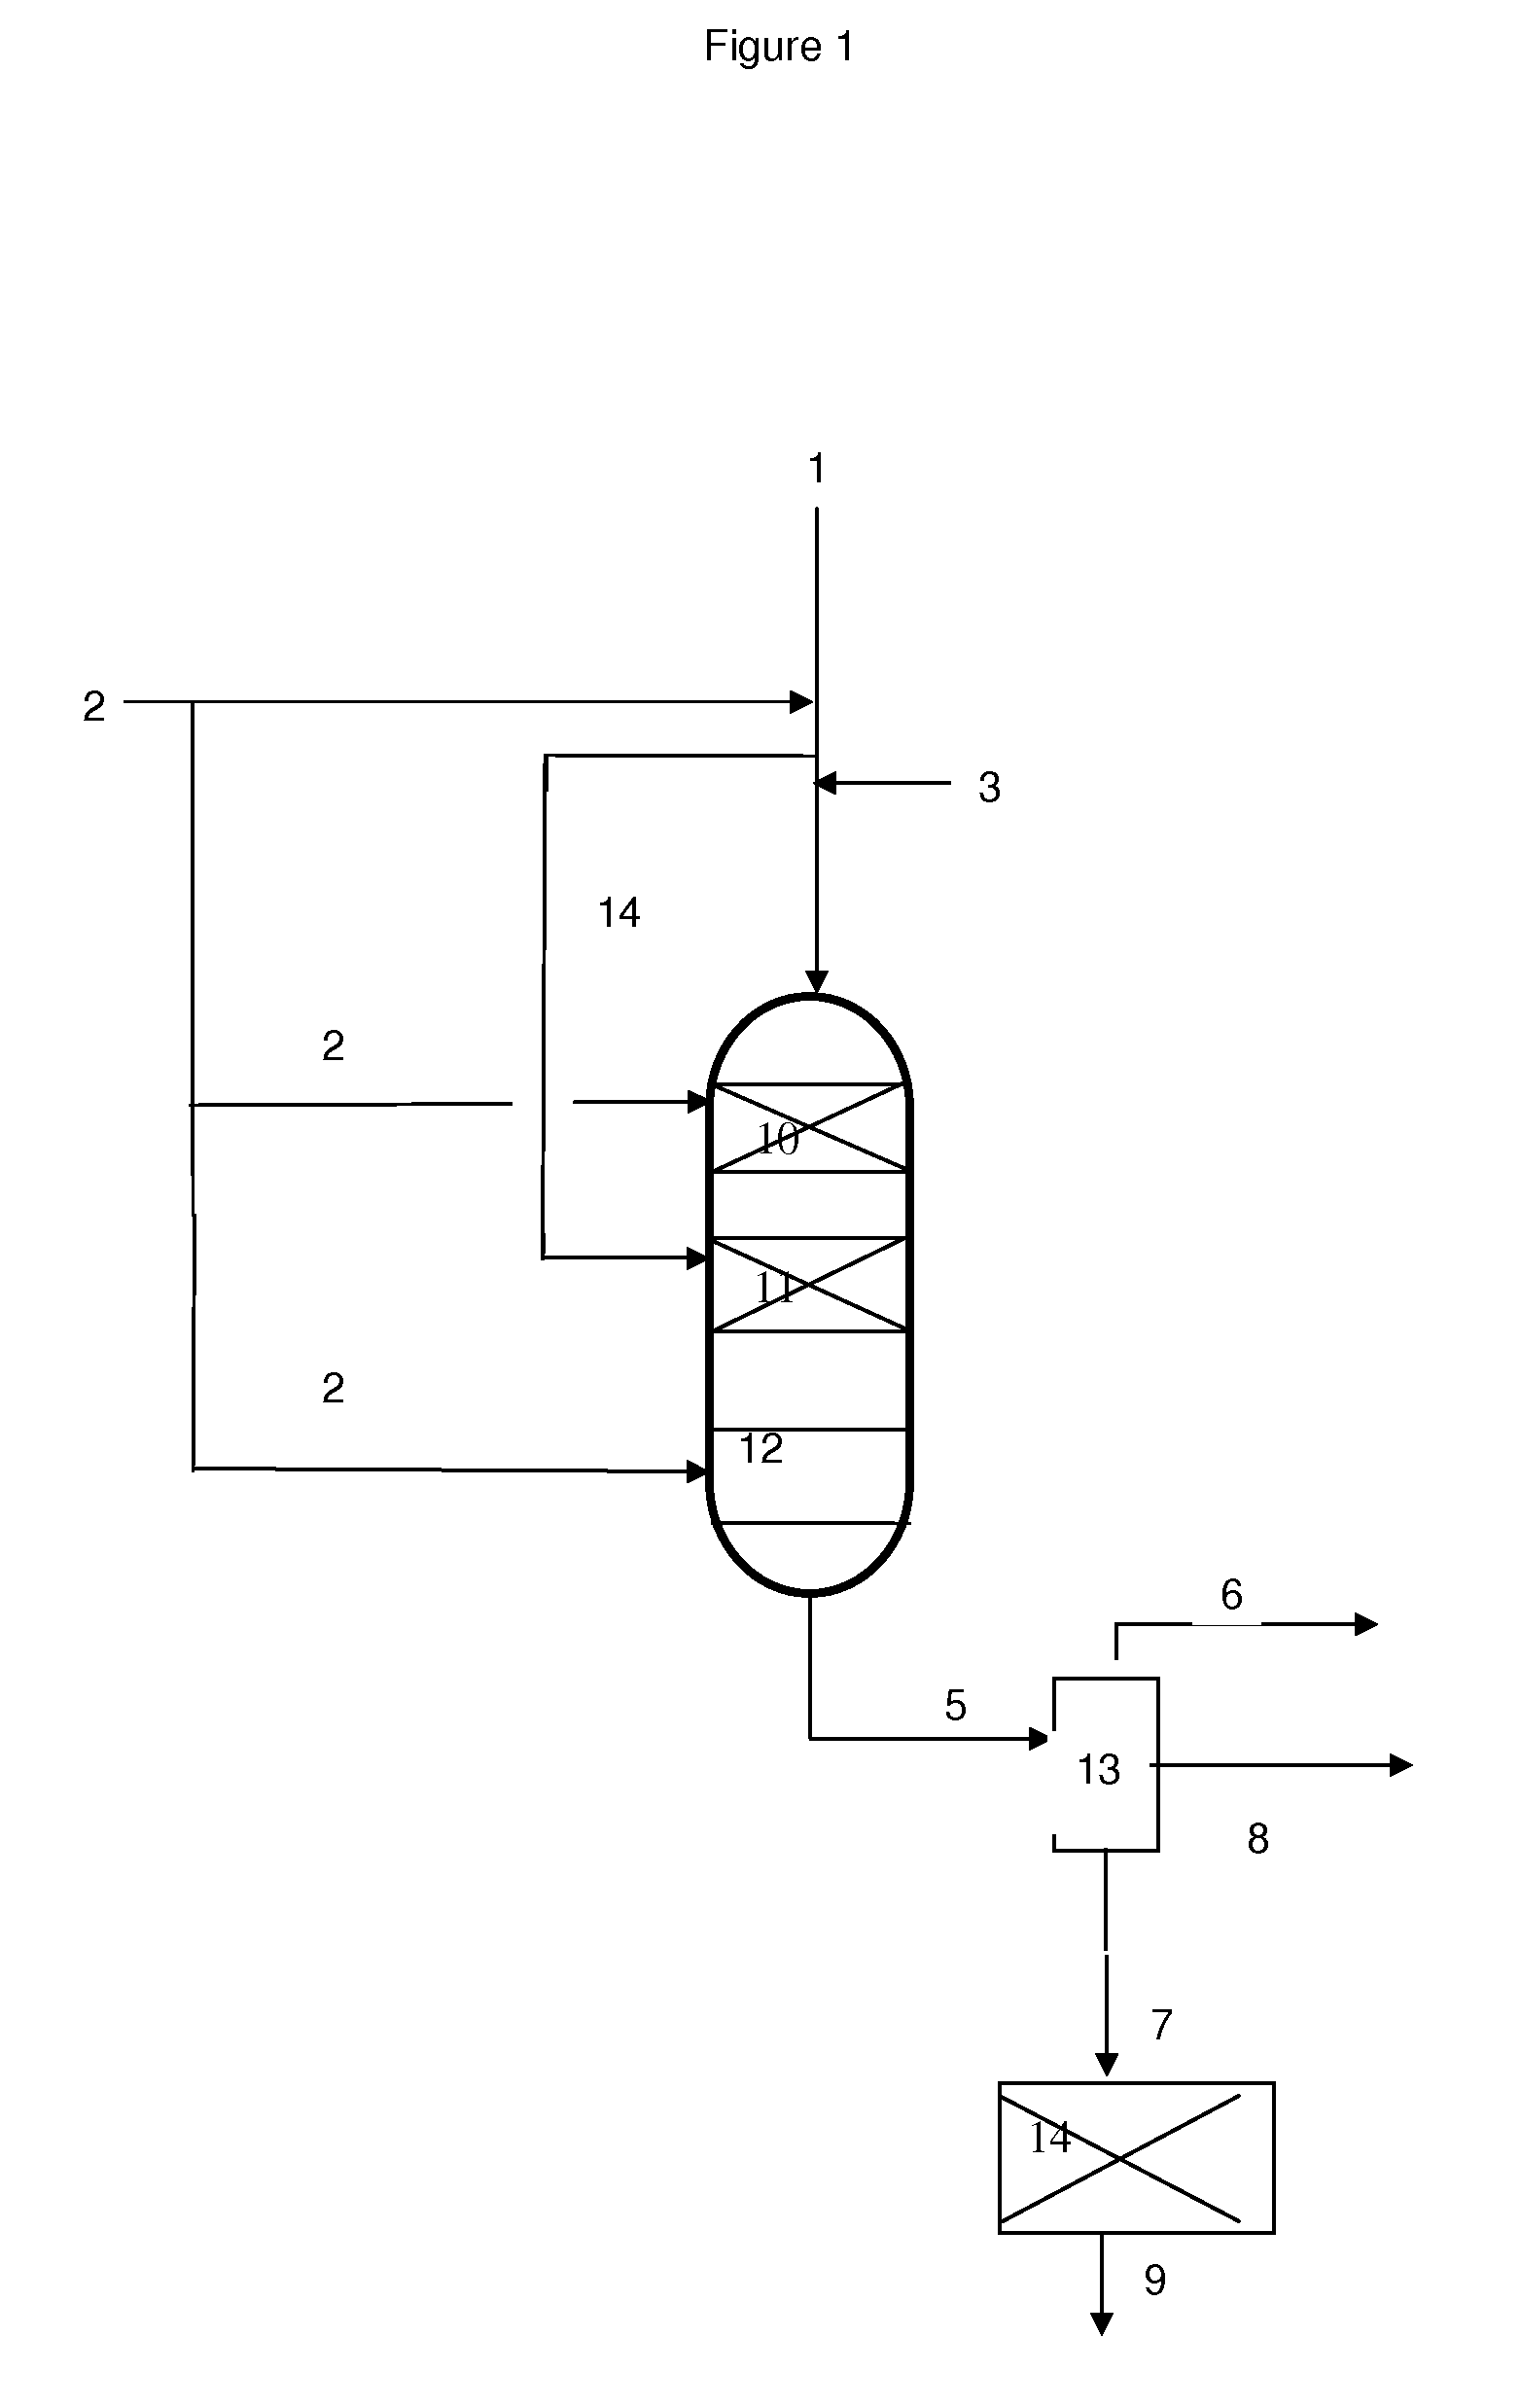 Method of converting feeds from renewable sources in co-processing with a petroleum feed using a catalyst based on nickel and molybdenum